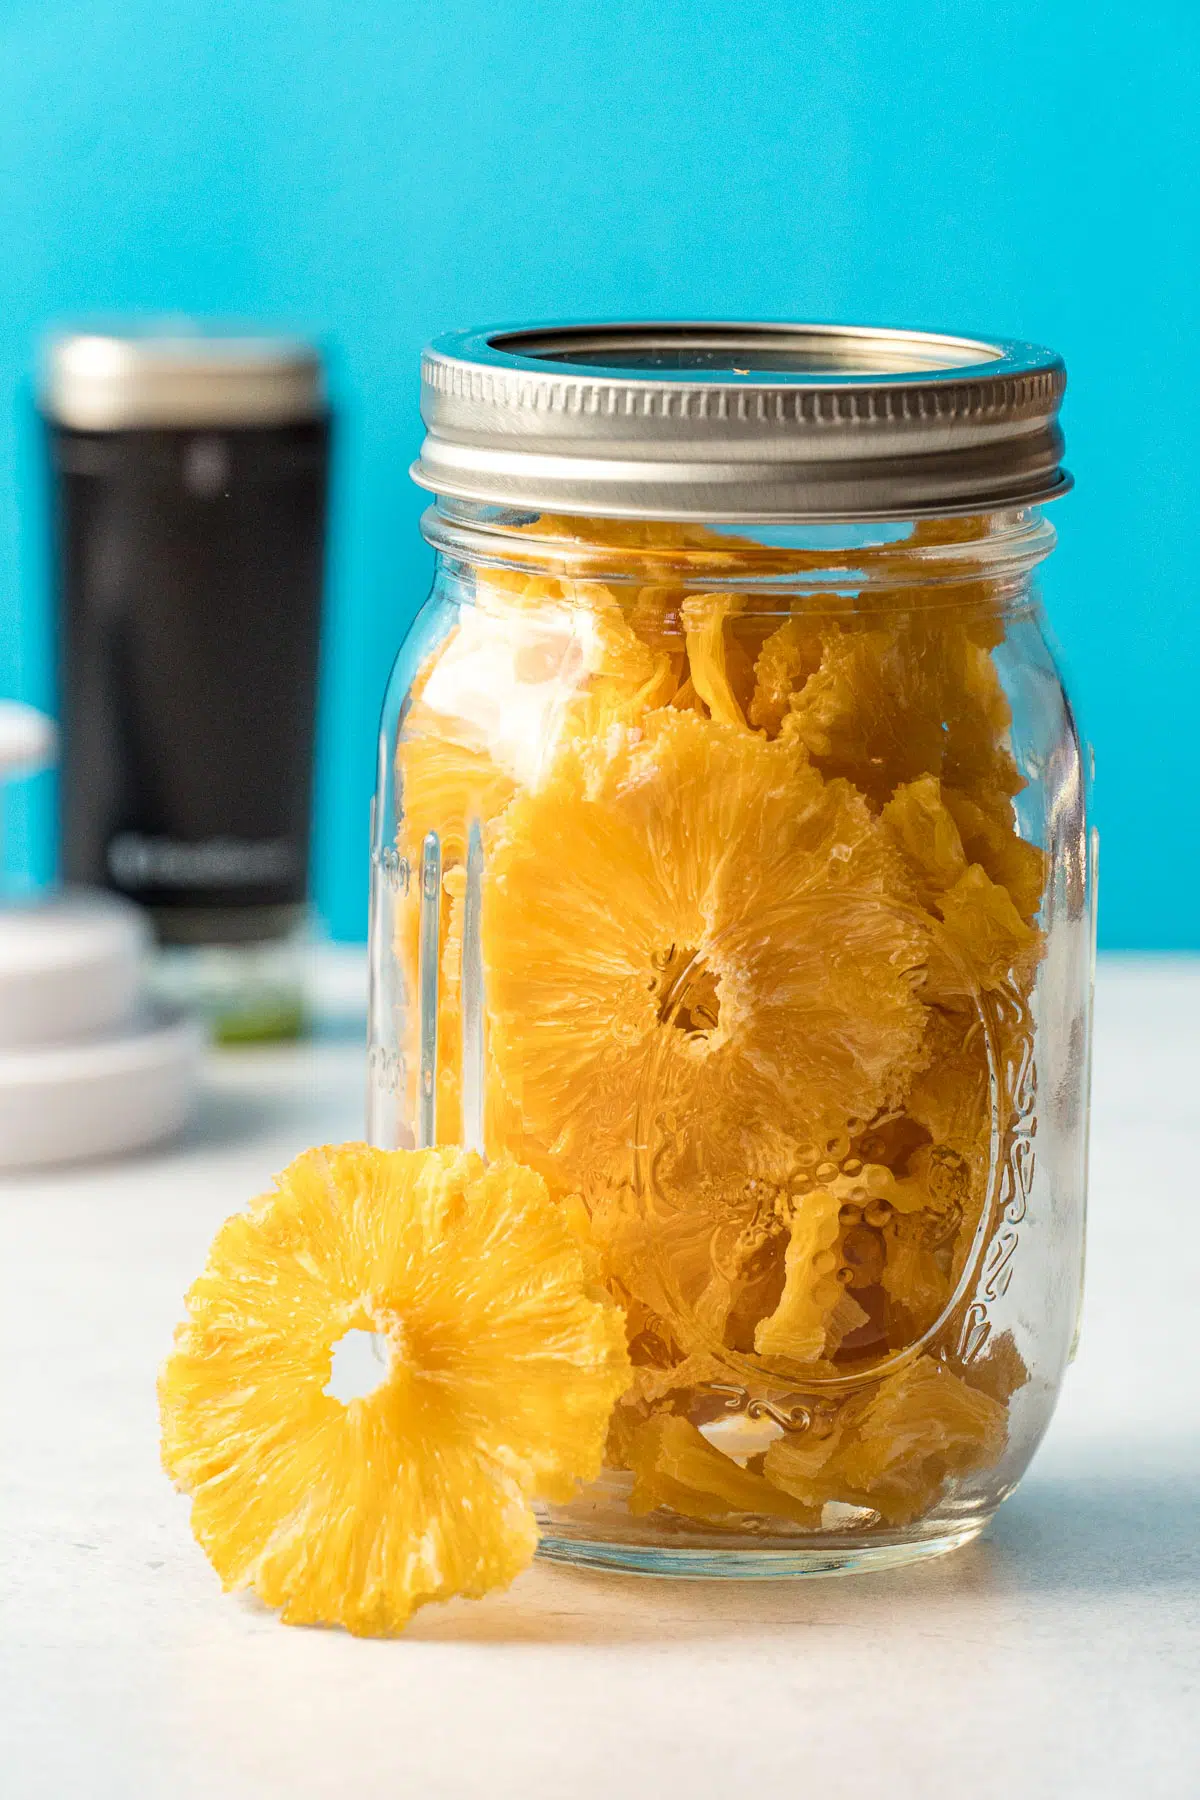 Dried pineapple in a jar